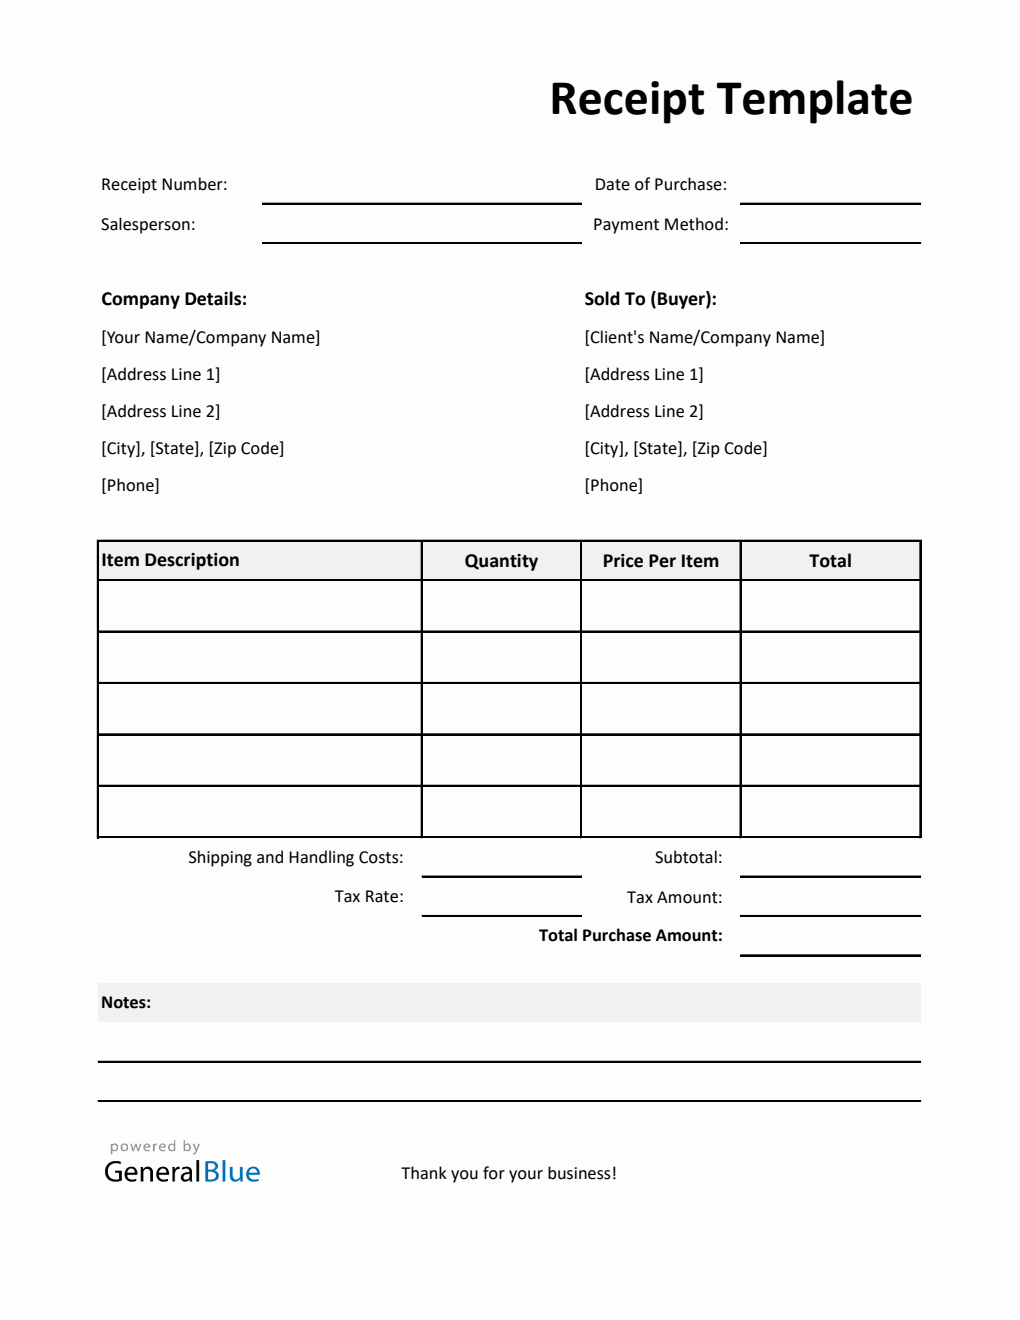 Basic Receipt Template with Notes in Excel